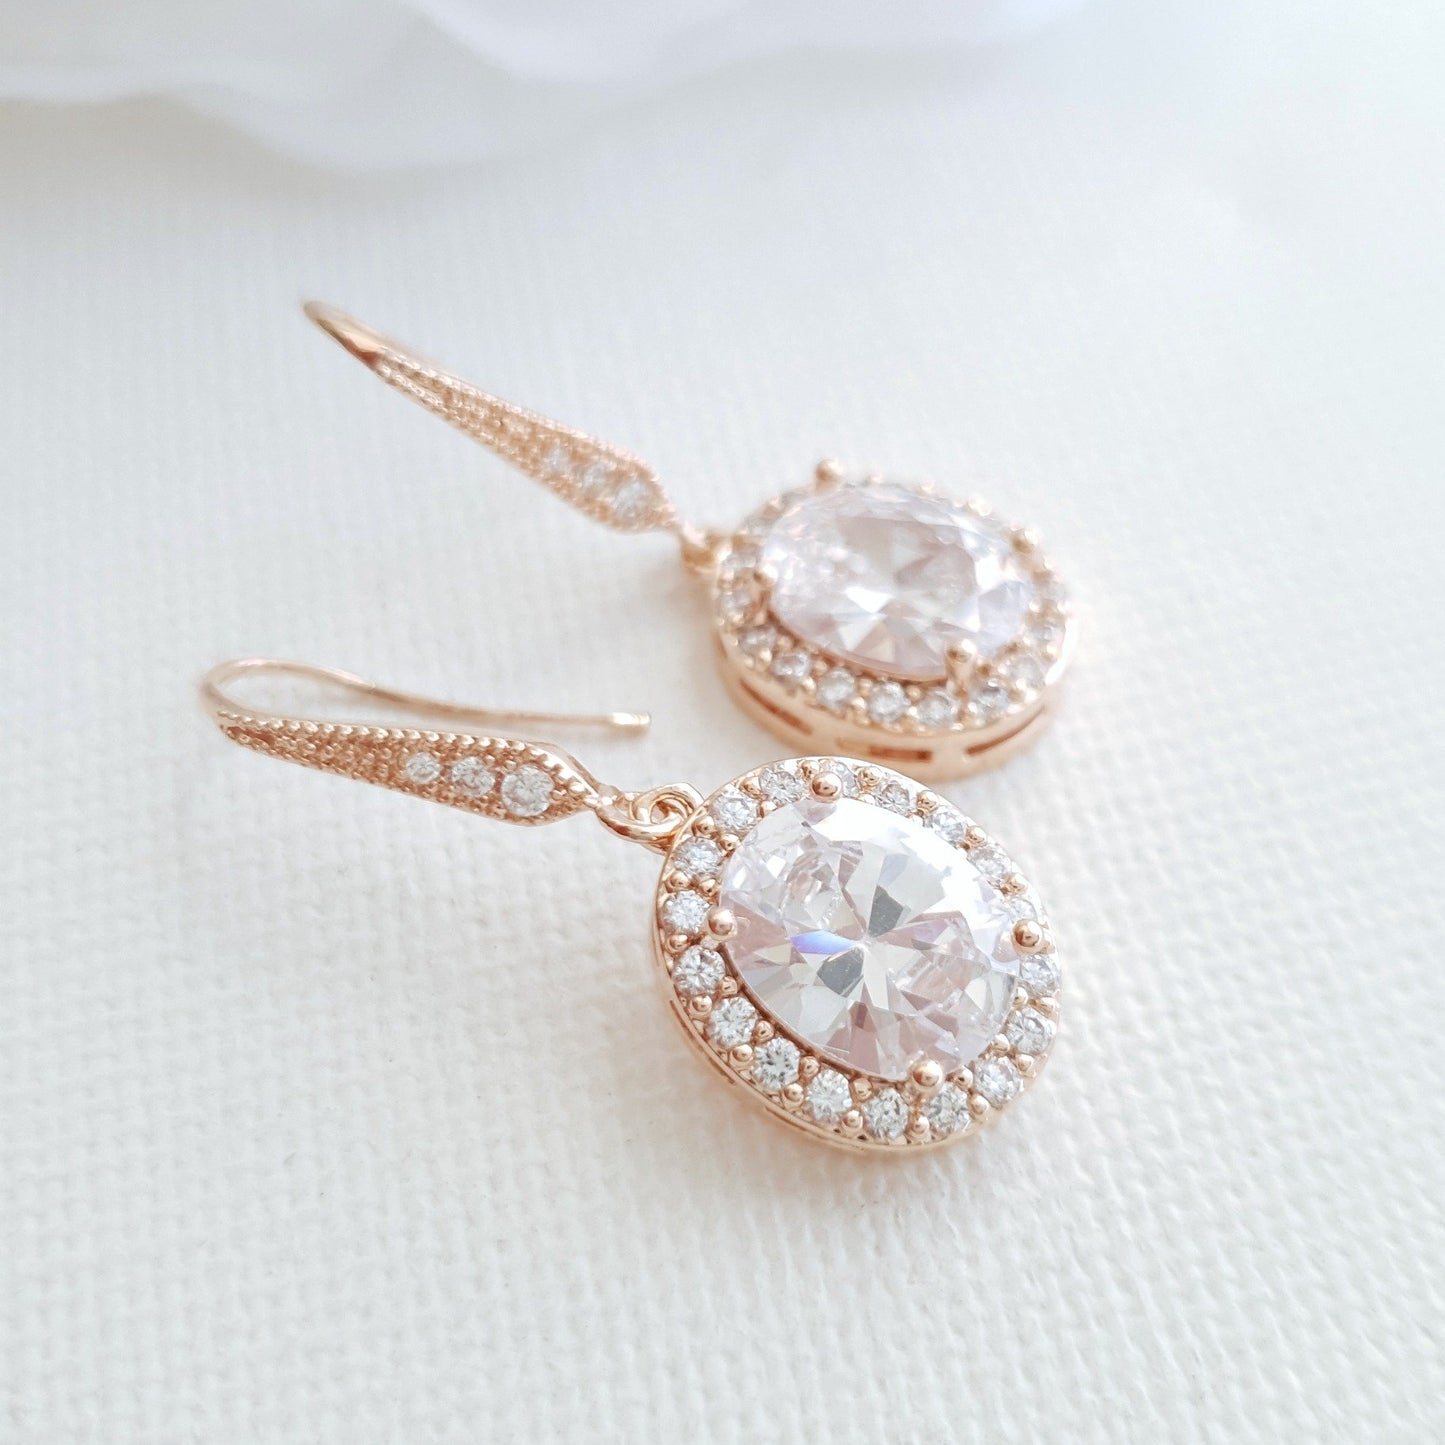 Rose gold and CZ small dangle earrings with CZ studded ear hooks- Poetry Designs